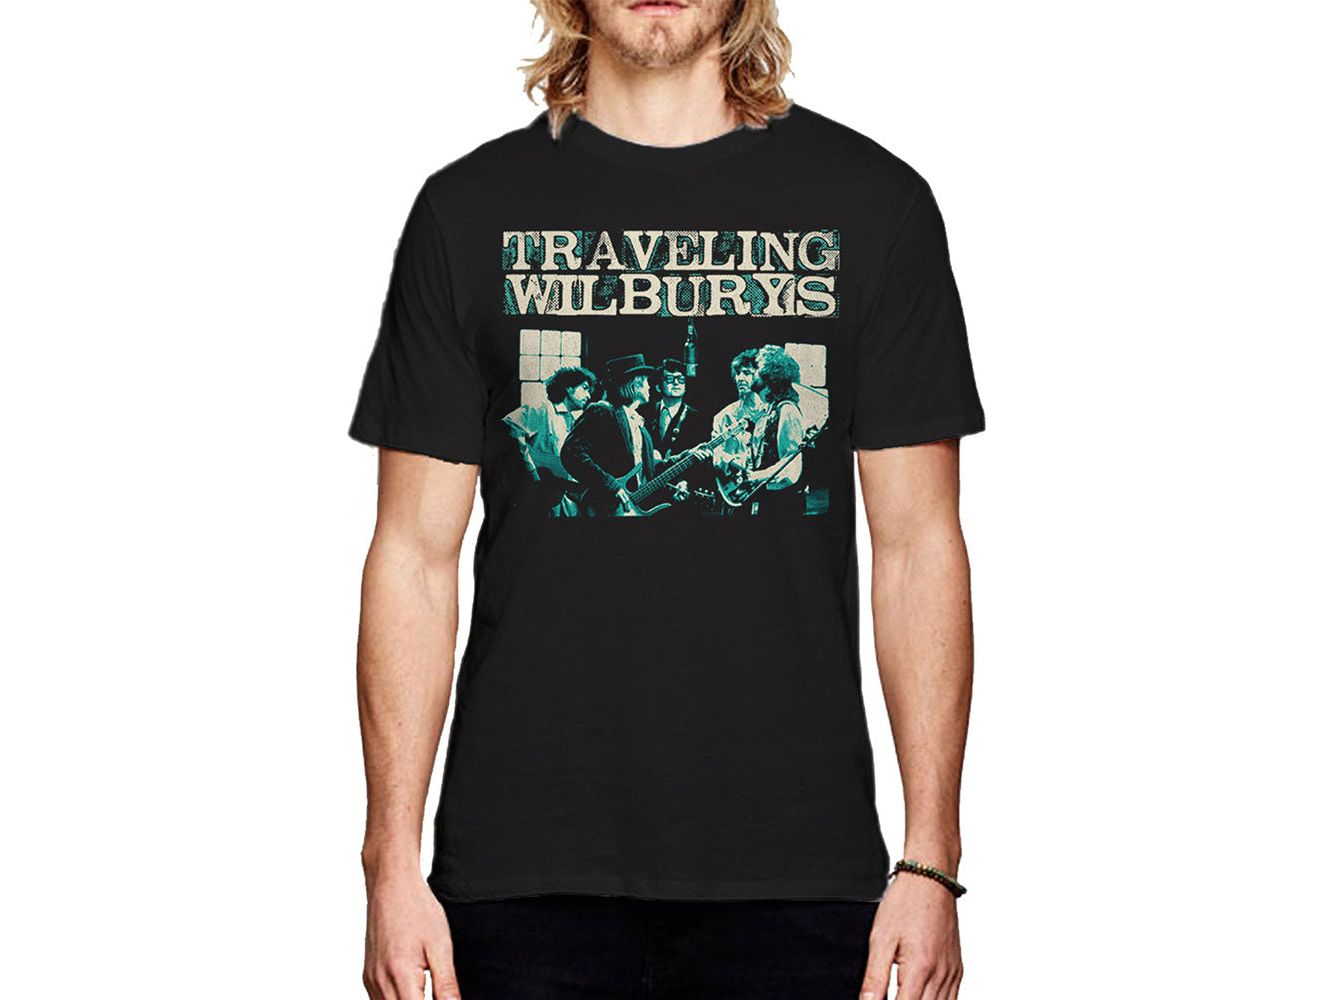 THE TRAVELING WILBURYS UNISEX T-SHIRT PERFORMING